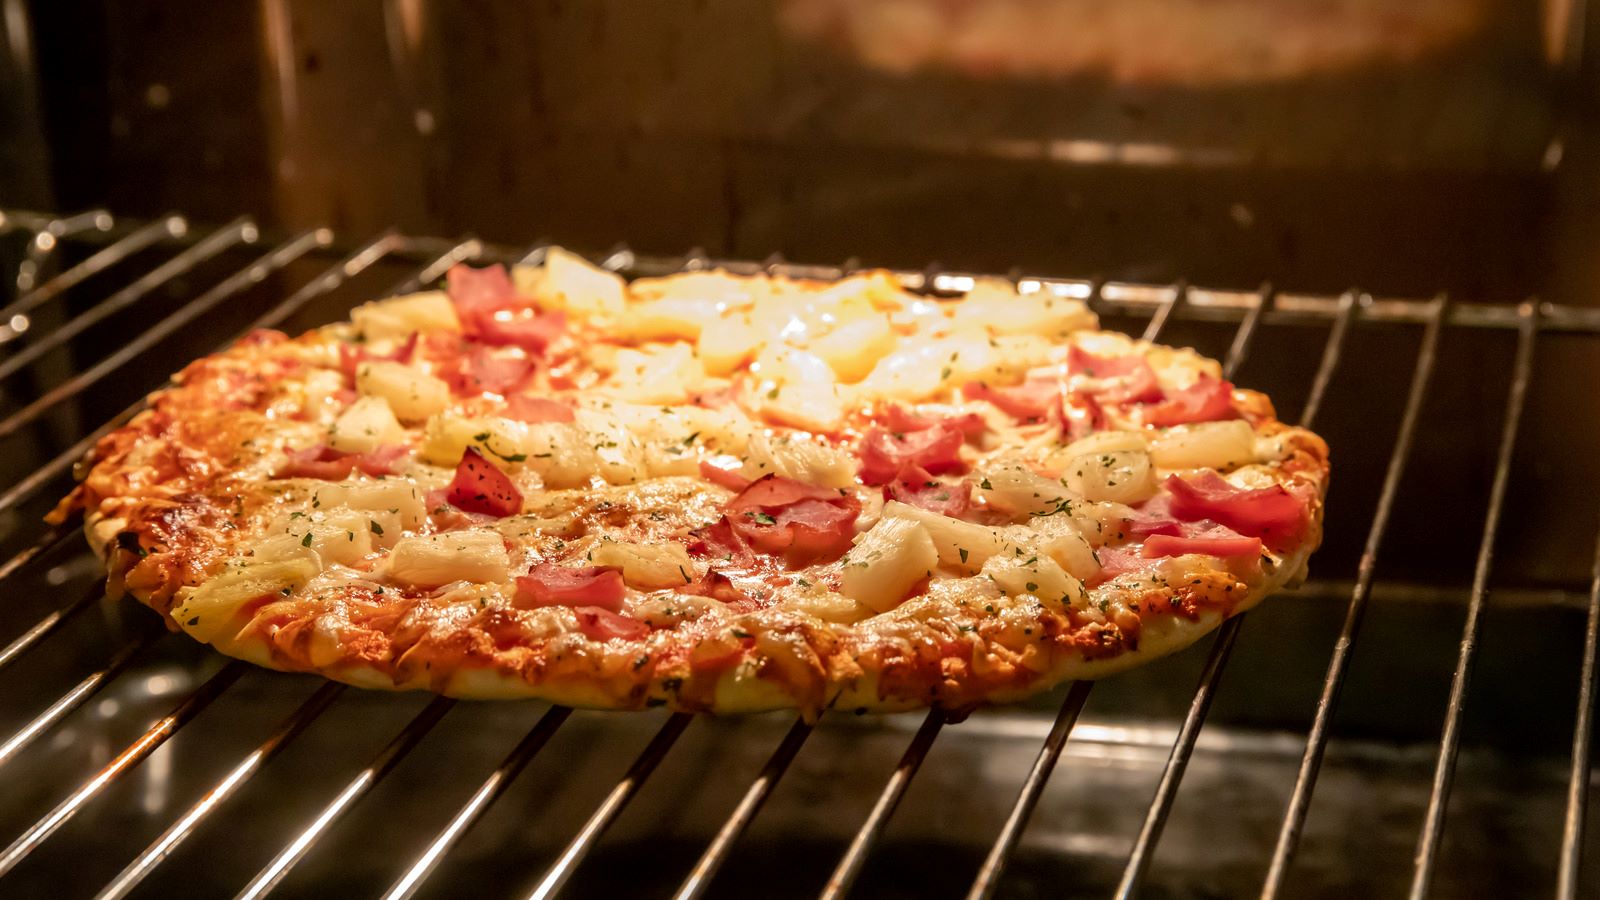 Diana Cook Independent Tupperware Consultant - There's so many ways to make  pizza that isn't frozen in a box. When I had kids at home, I made homemade  pizza crust and sometimes